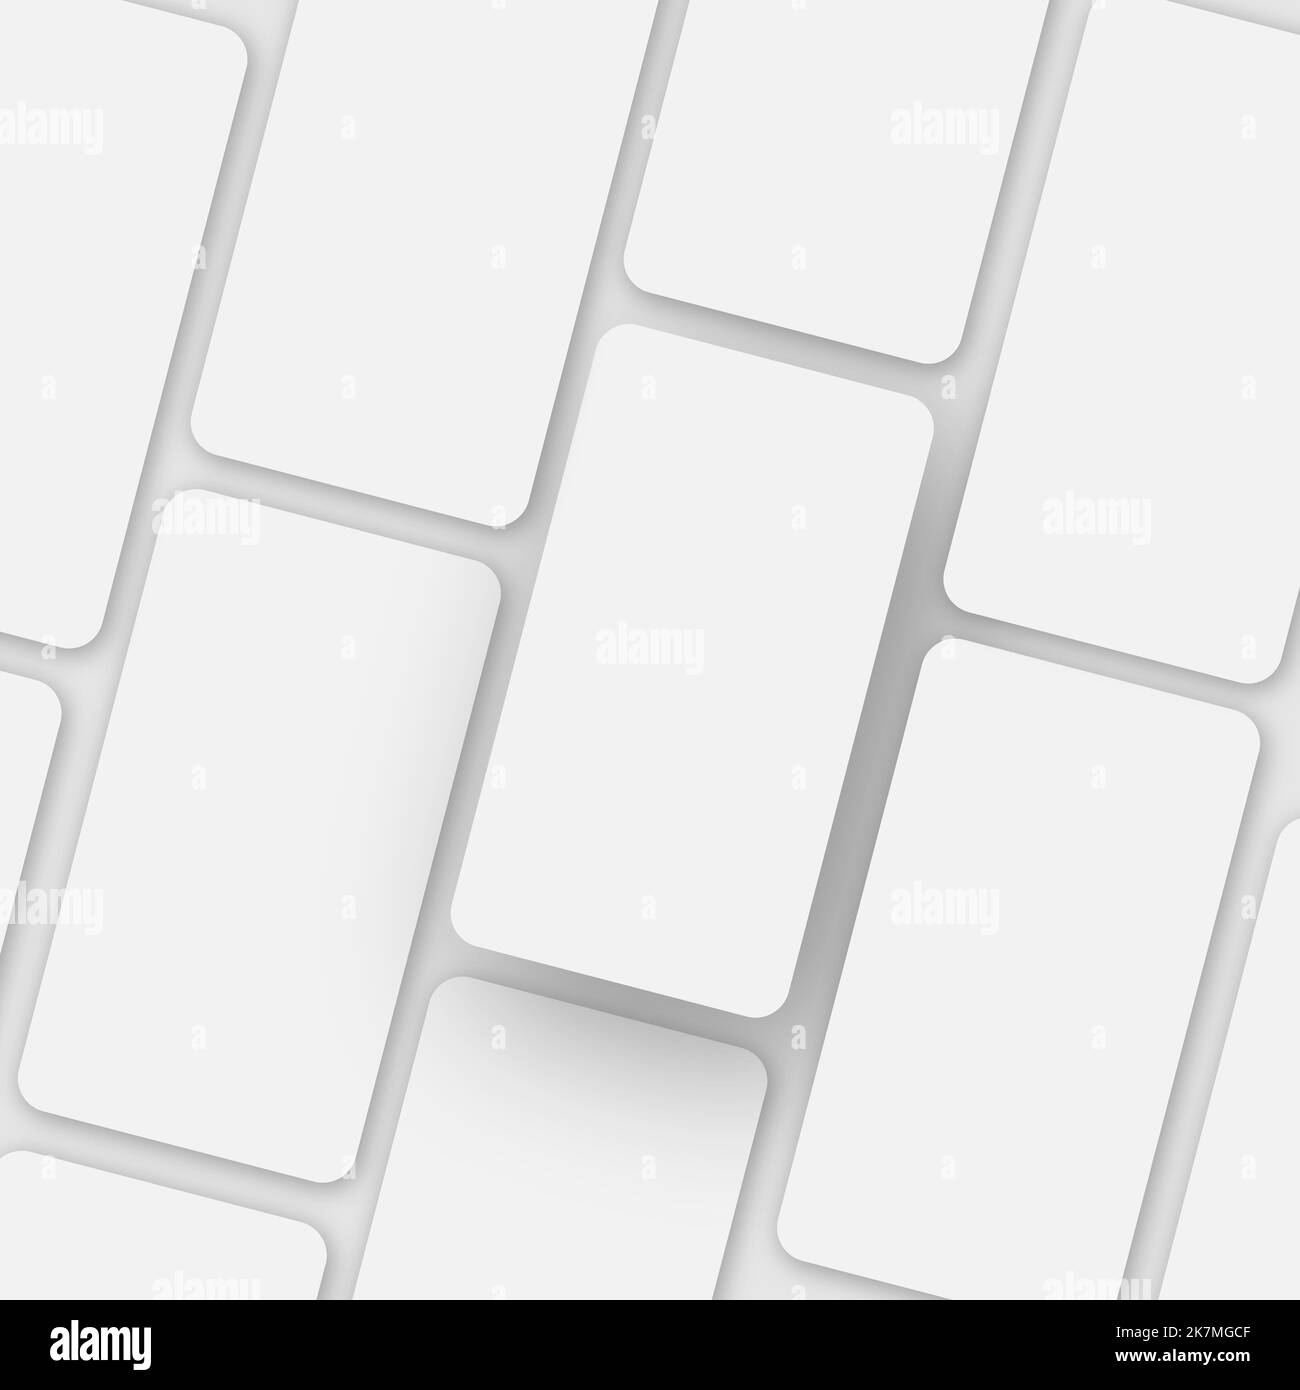 Pattern Of Many Smartphones With Blank Screens Over Gray Background Stock Photo